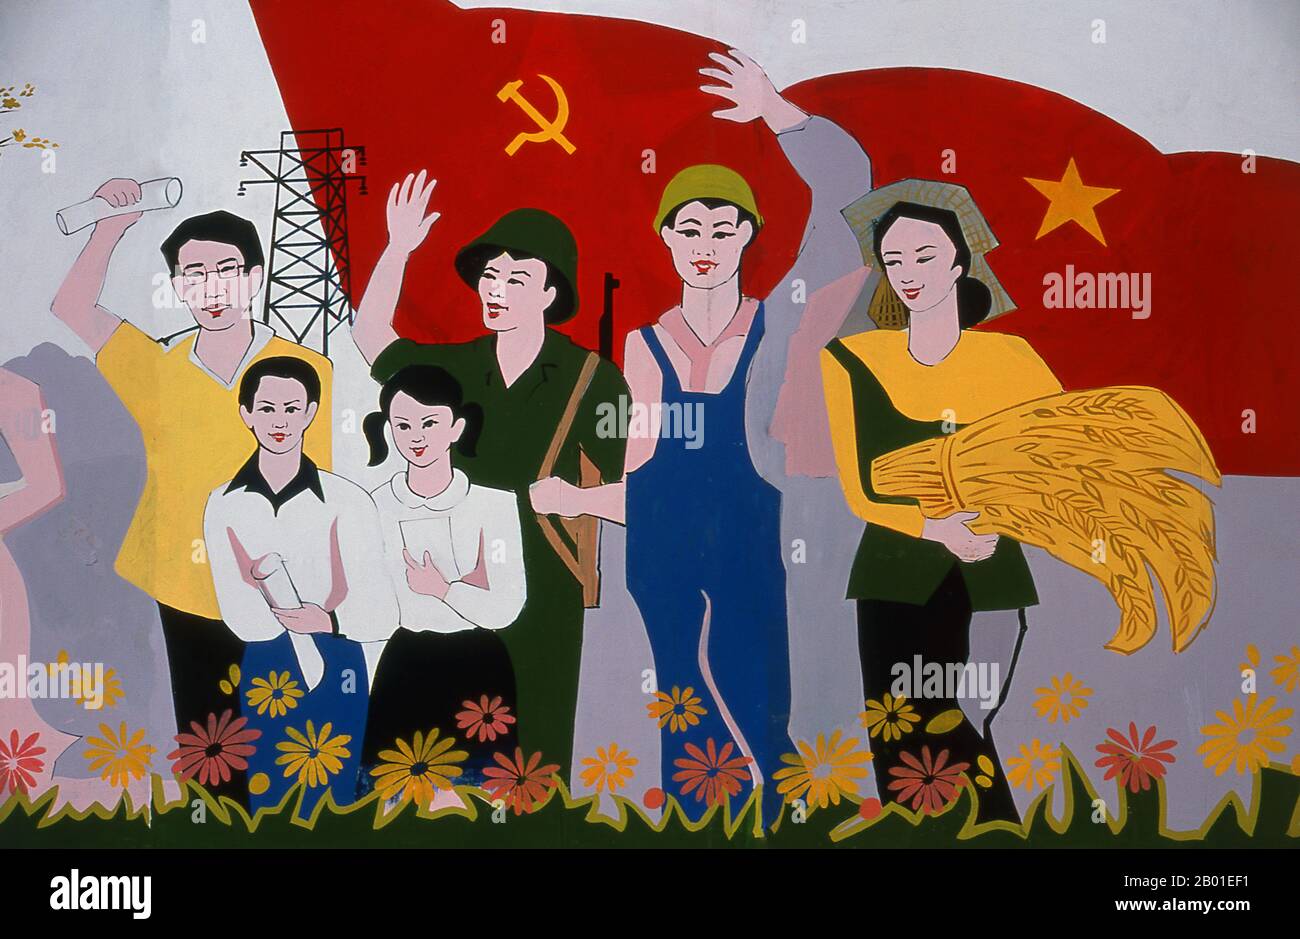 Vietnam: Revolutionary Socialist realist-style political hoardings can be seen in all corners of Vietnam.  Socialist realism is a style of realistic art which was developed in the Soviet Union and became a dominant style in other communist countries. Socialist realism is a teleologically-oriented style having its purpose the furtherance of the goals of socialism and communism. Although related, it should not be confused with social realism, a type of art that realistically depicts subjects of social concern. Unlike social realism, socialist realism often glorifies the roles of the poor. Stock Photo